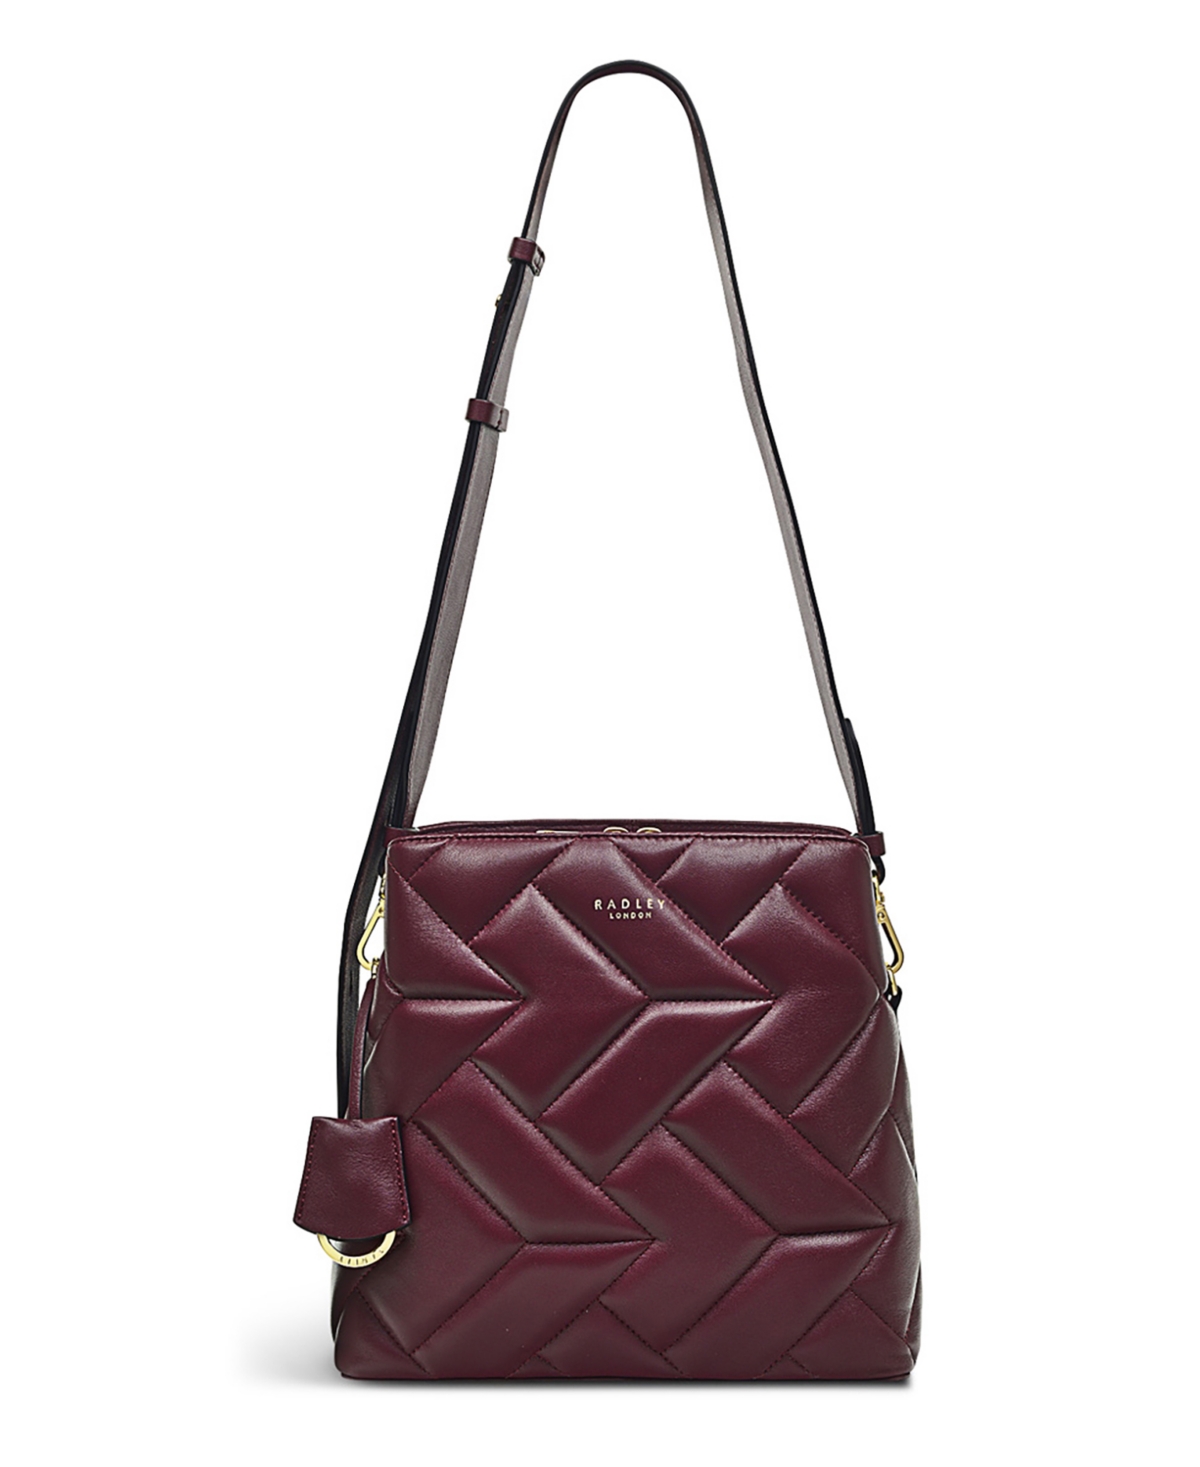 Dukes Place Small Compartment Leather Crossbody - Dark Cherry